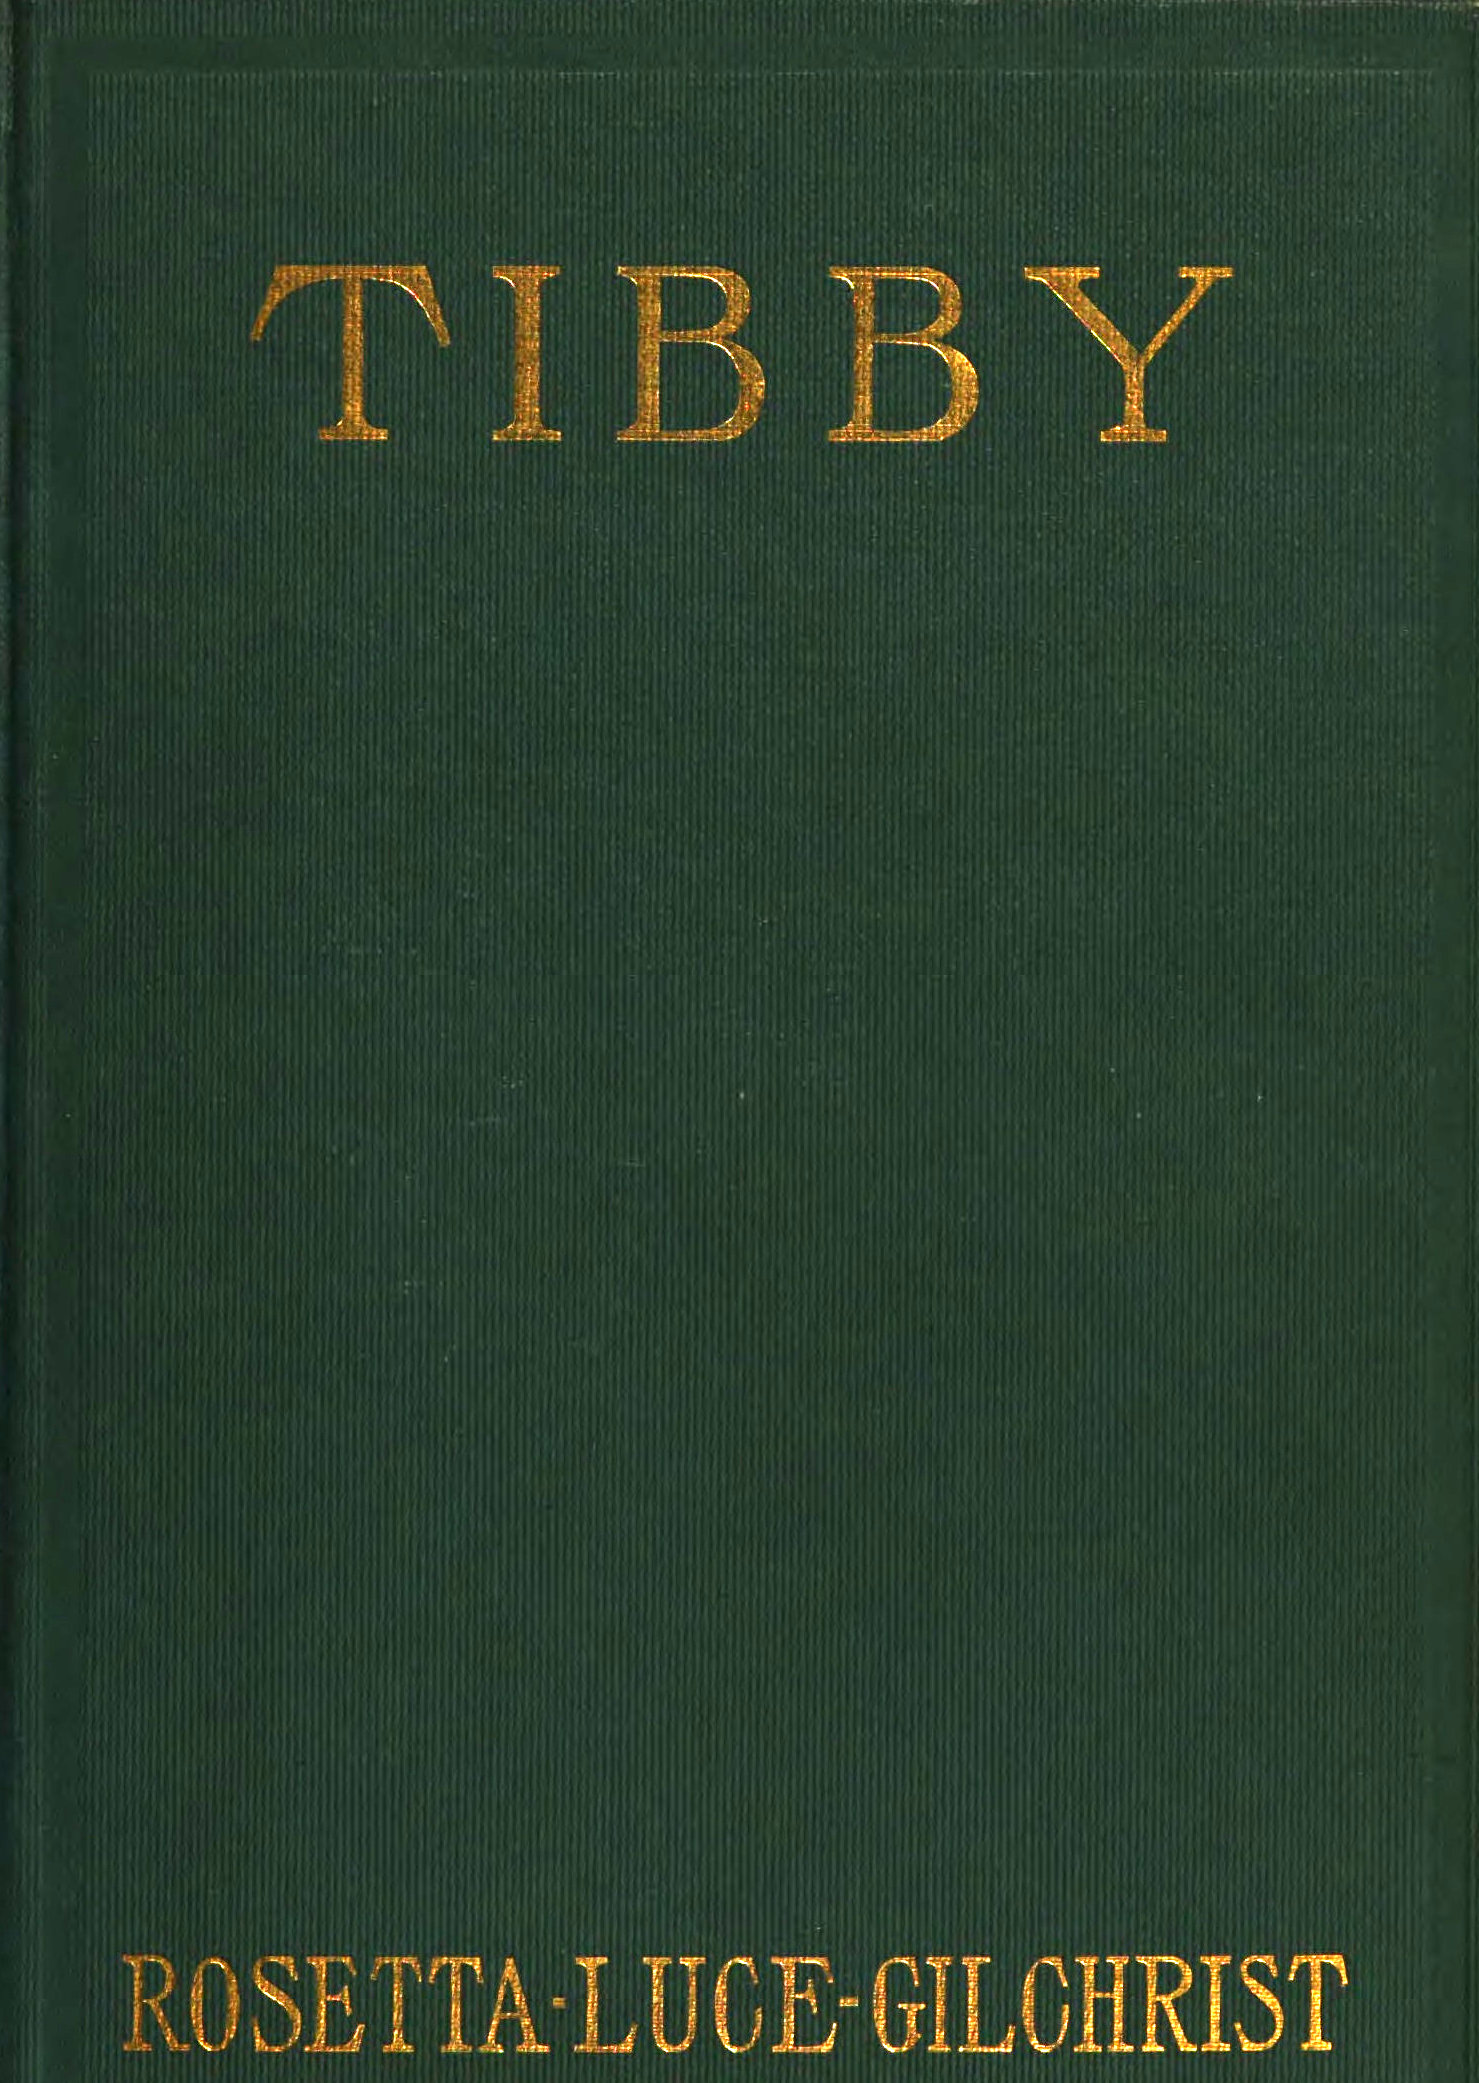 Tibby: A novel dealing with psychic forces and telepathy